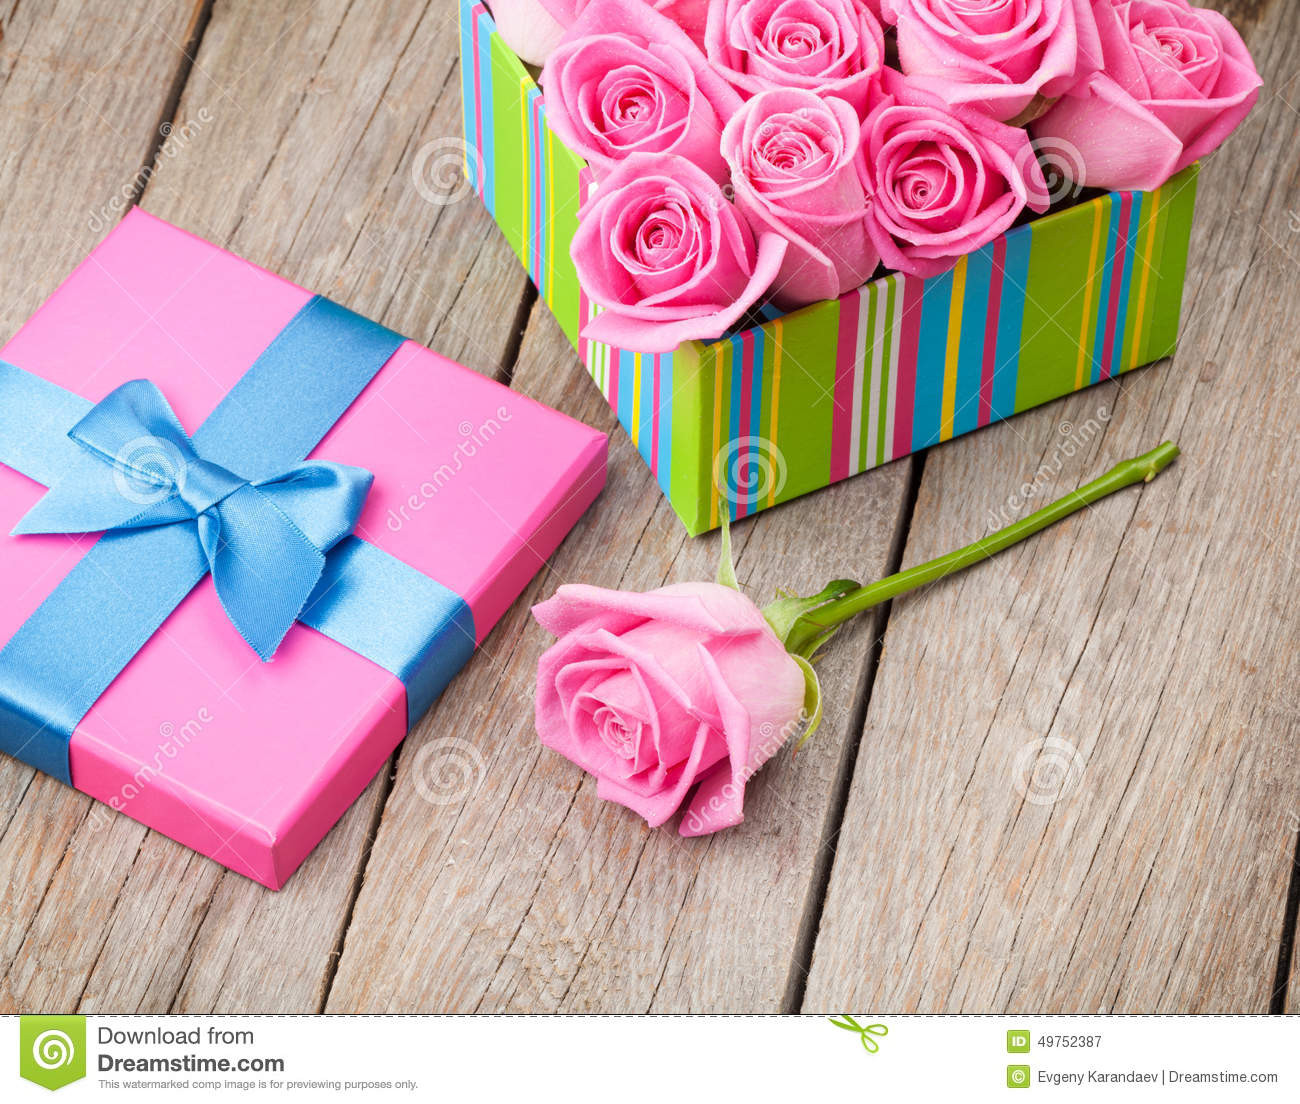 Valentines Day Gift Package
 Valentines Day Gift Box Full Pink Roses Stock Image